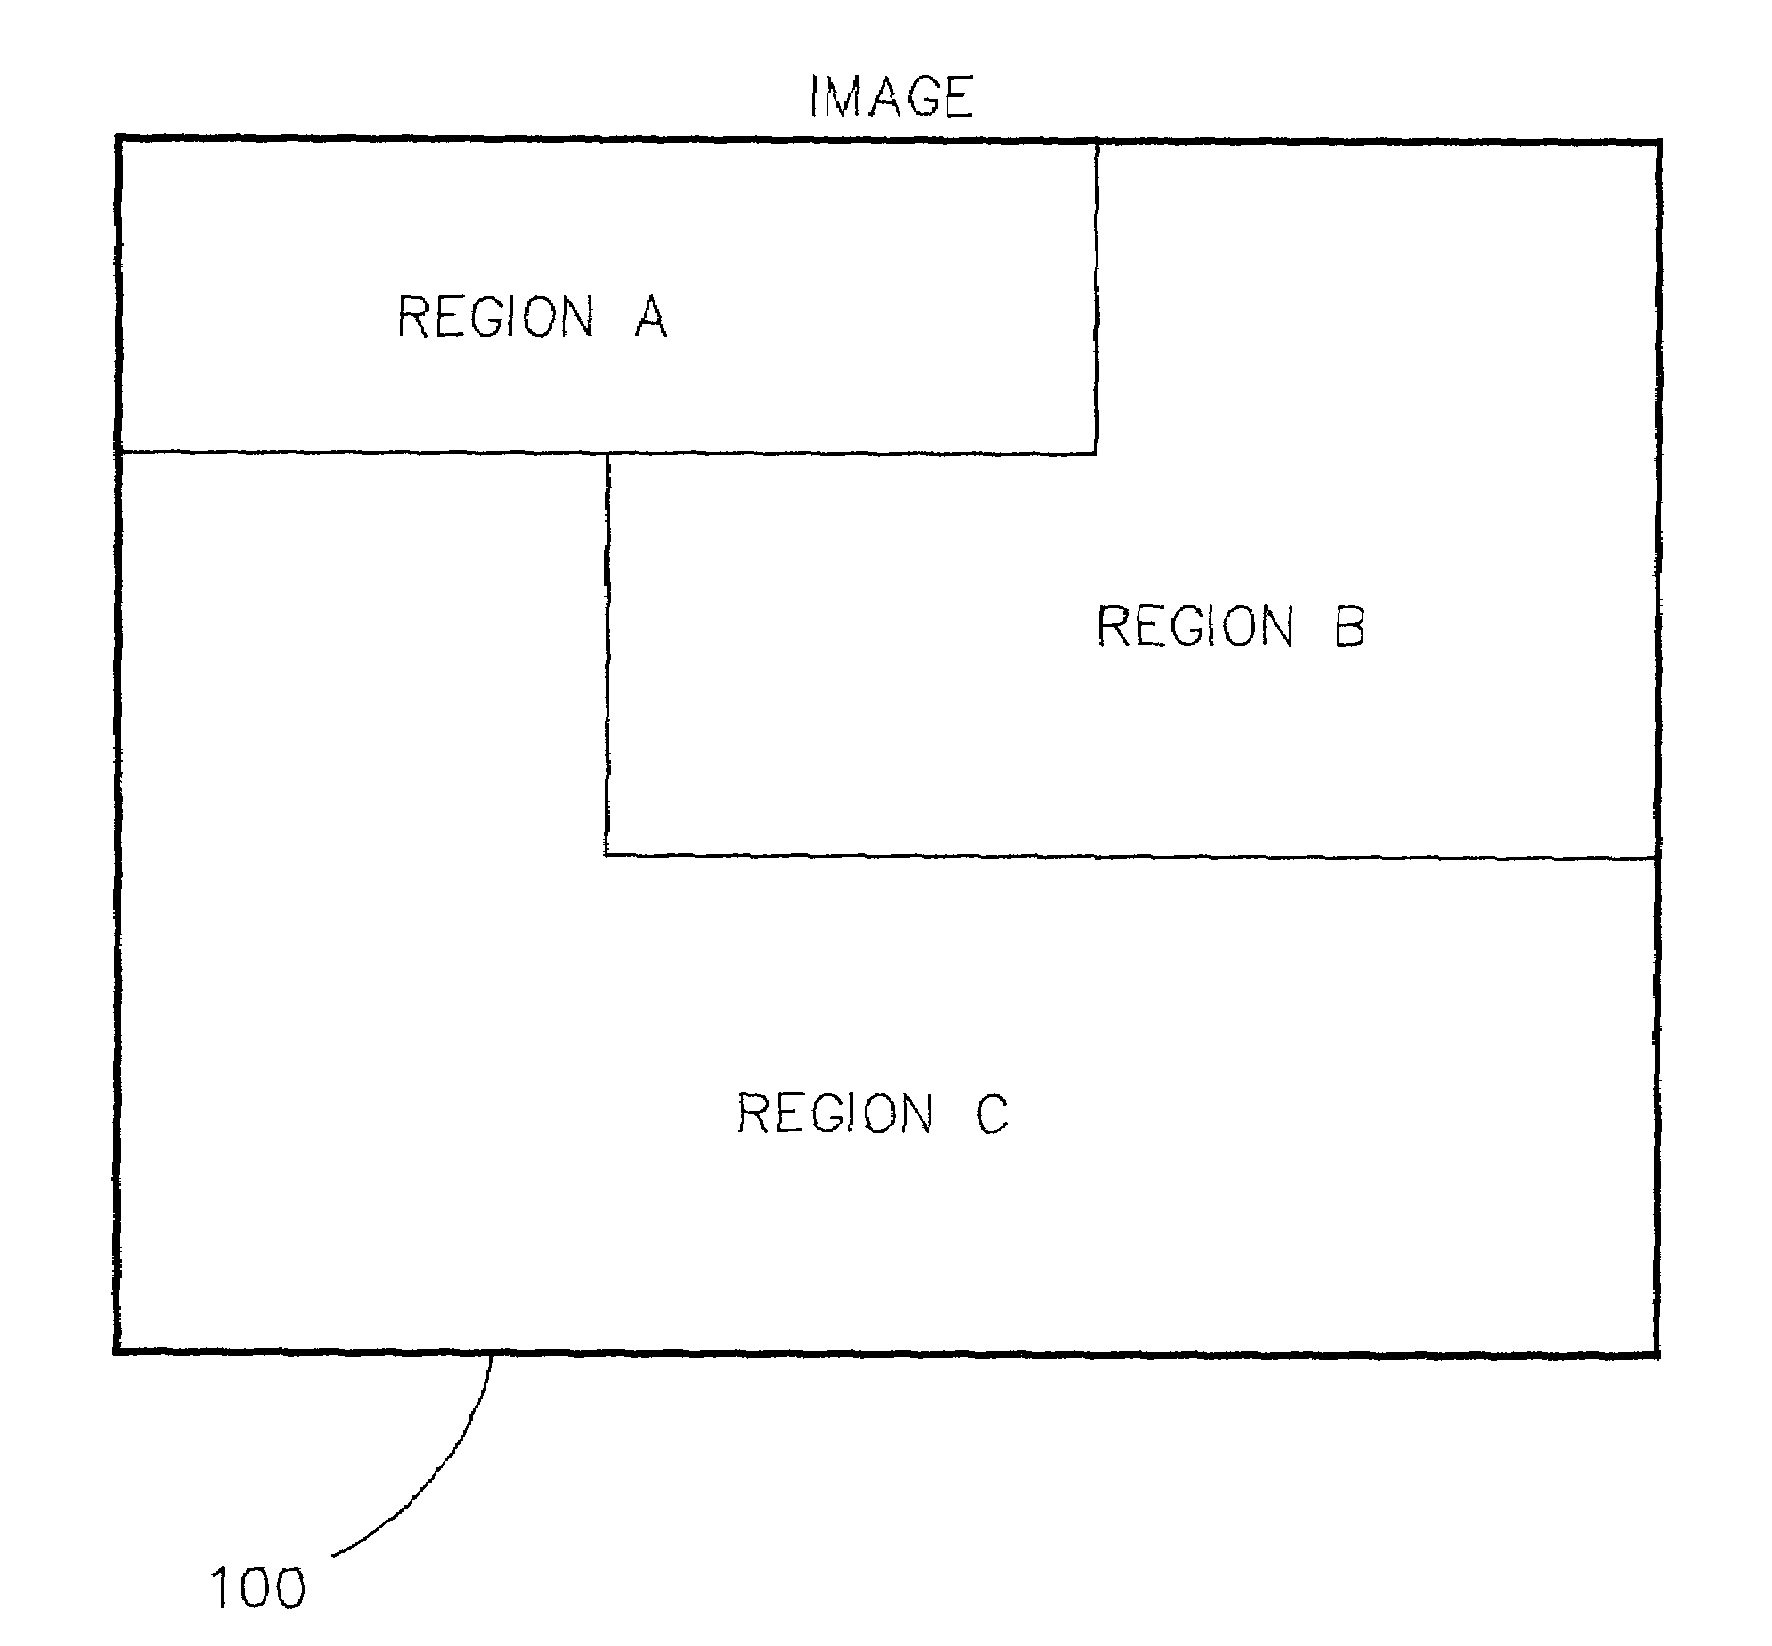 Image capturing device capable of single pixel exposure duration control